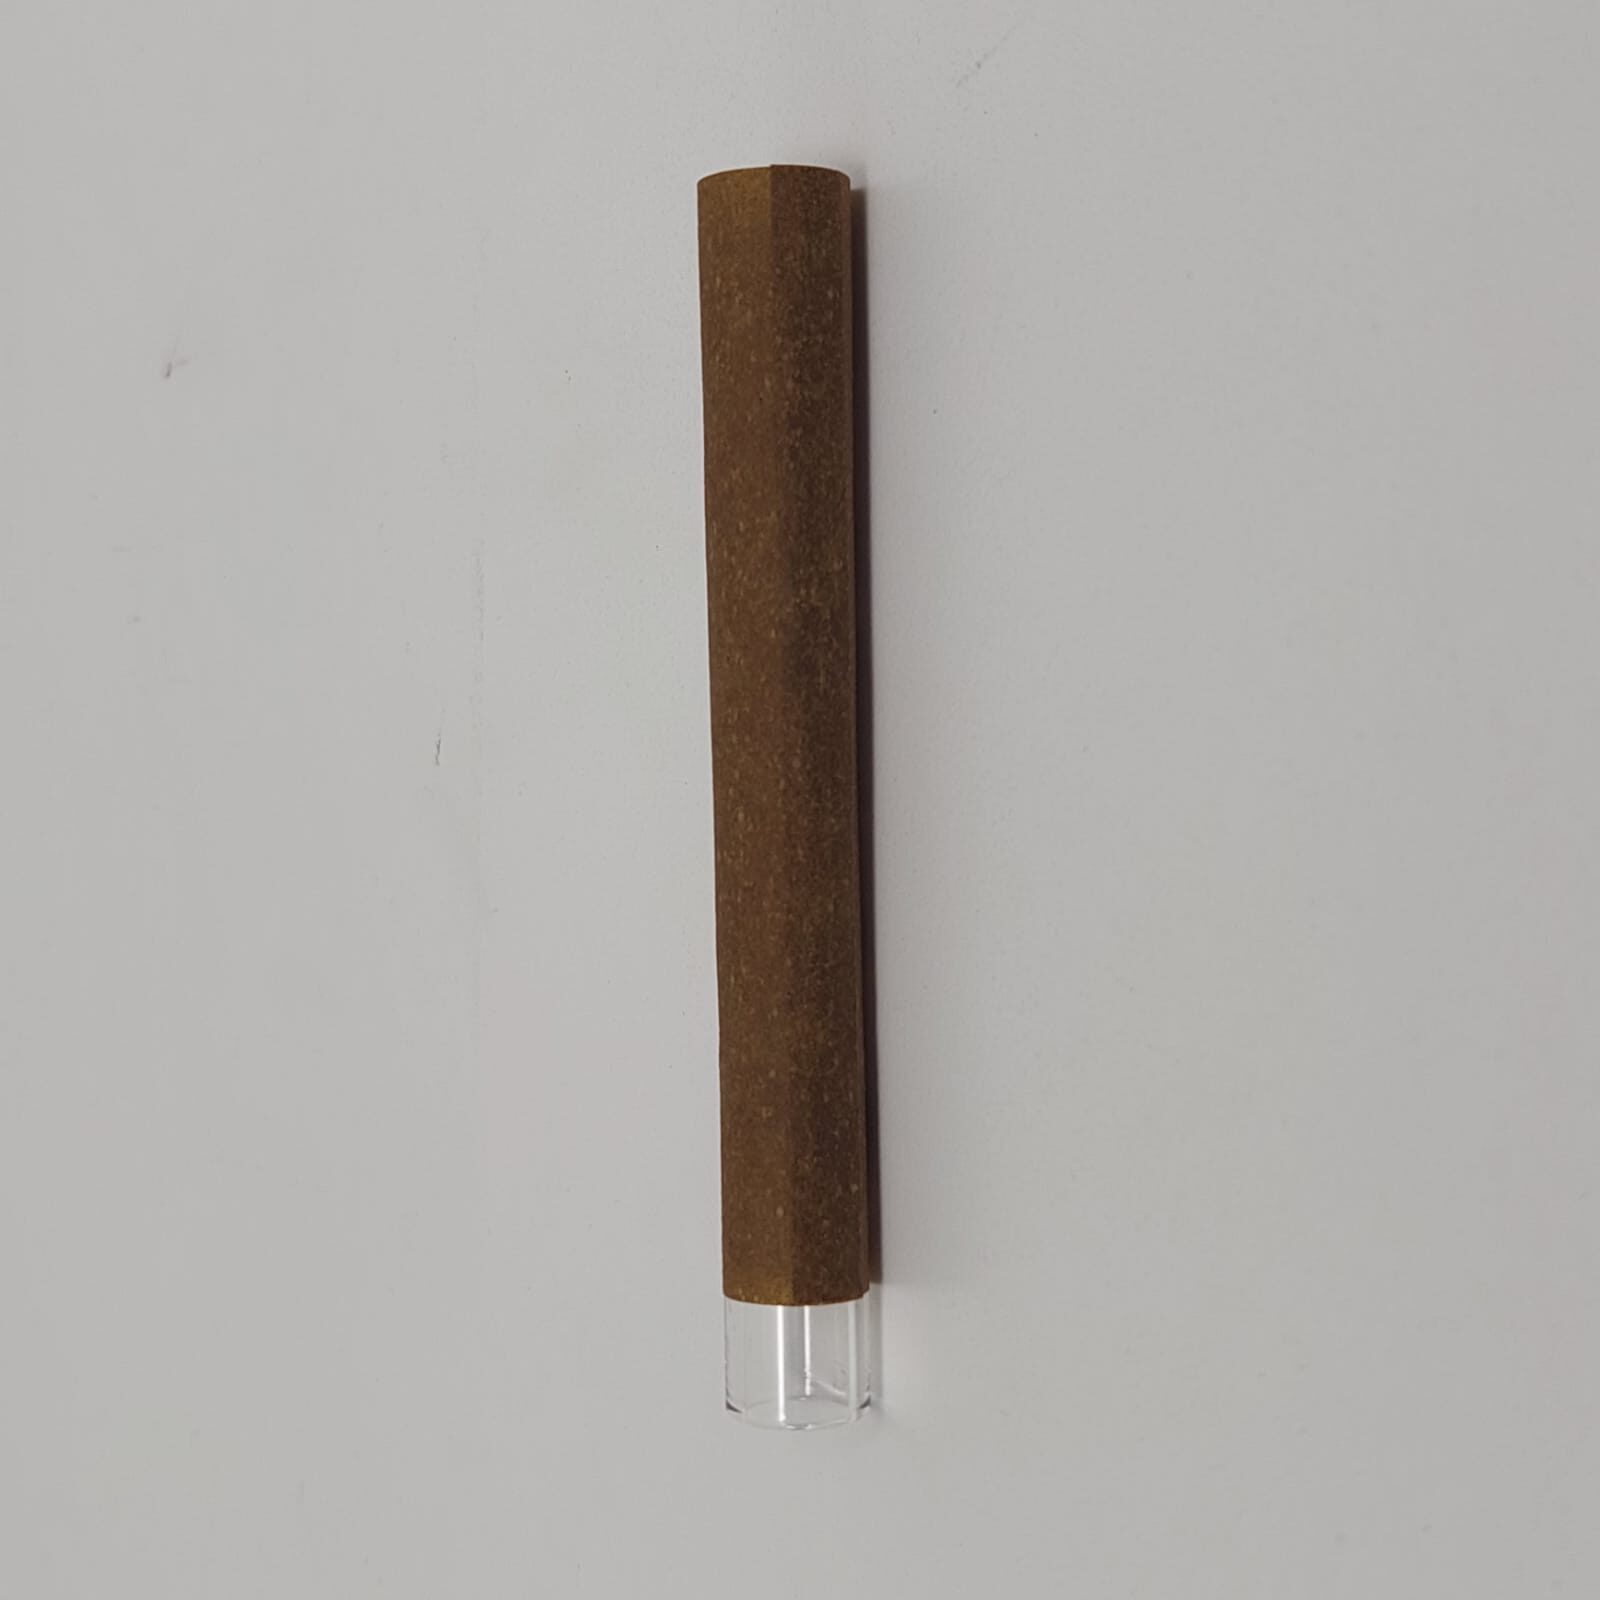  Brown blunt tube with glass tip, designed for use with the RS 2000 Blunt Master